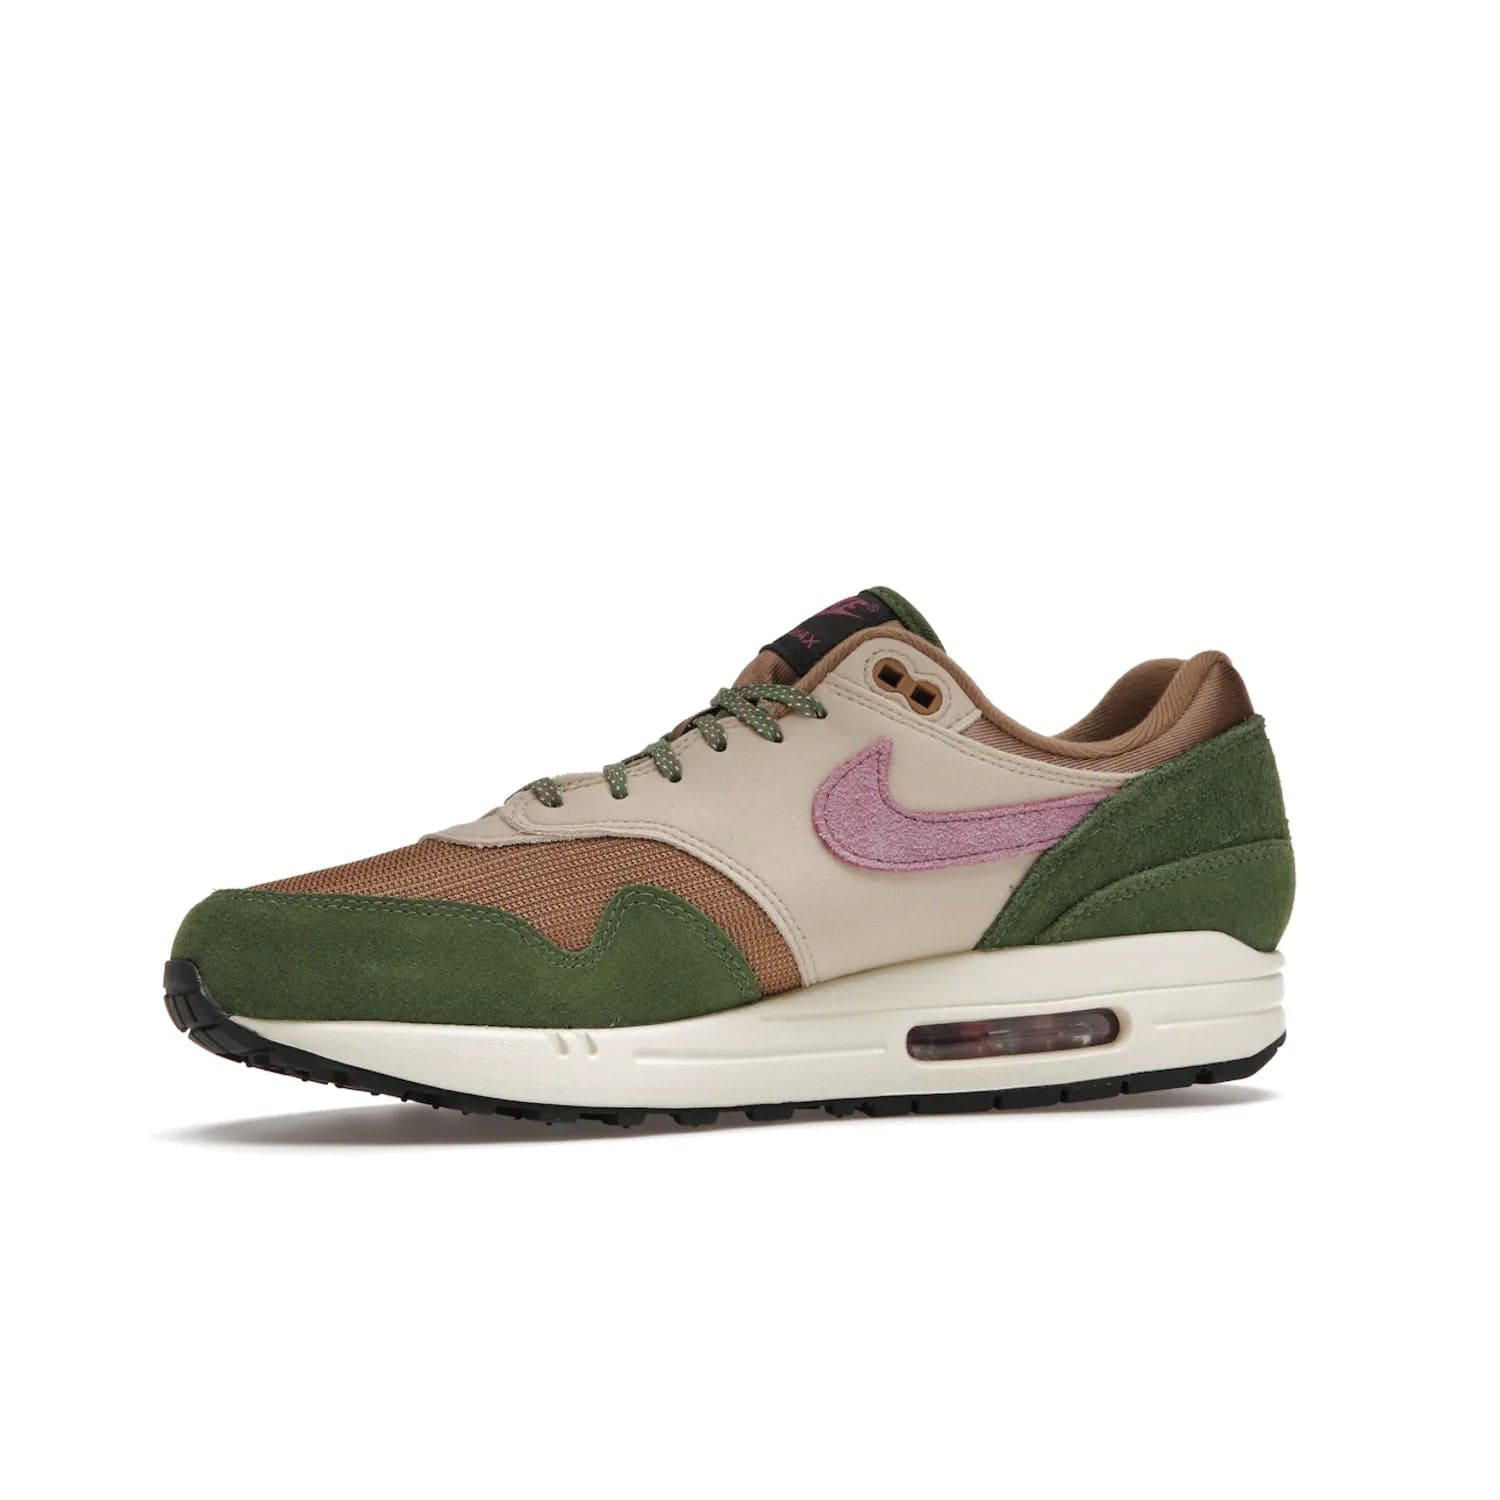 Nike Air Max 1 SH Treeline - Image 17 - Only at www.BallersClubKickz.com - A classic Nike Air Max 1 SH Treeline with a brown mesh upper, taupe Durabuck overlays, and hairy green suede details. Light Bordeaux Swoosh and woven tongue label for a pop of color. Released in May 2022. Perfect for any outfit and sure to impress.